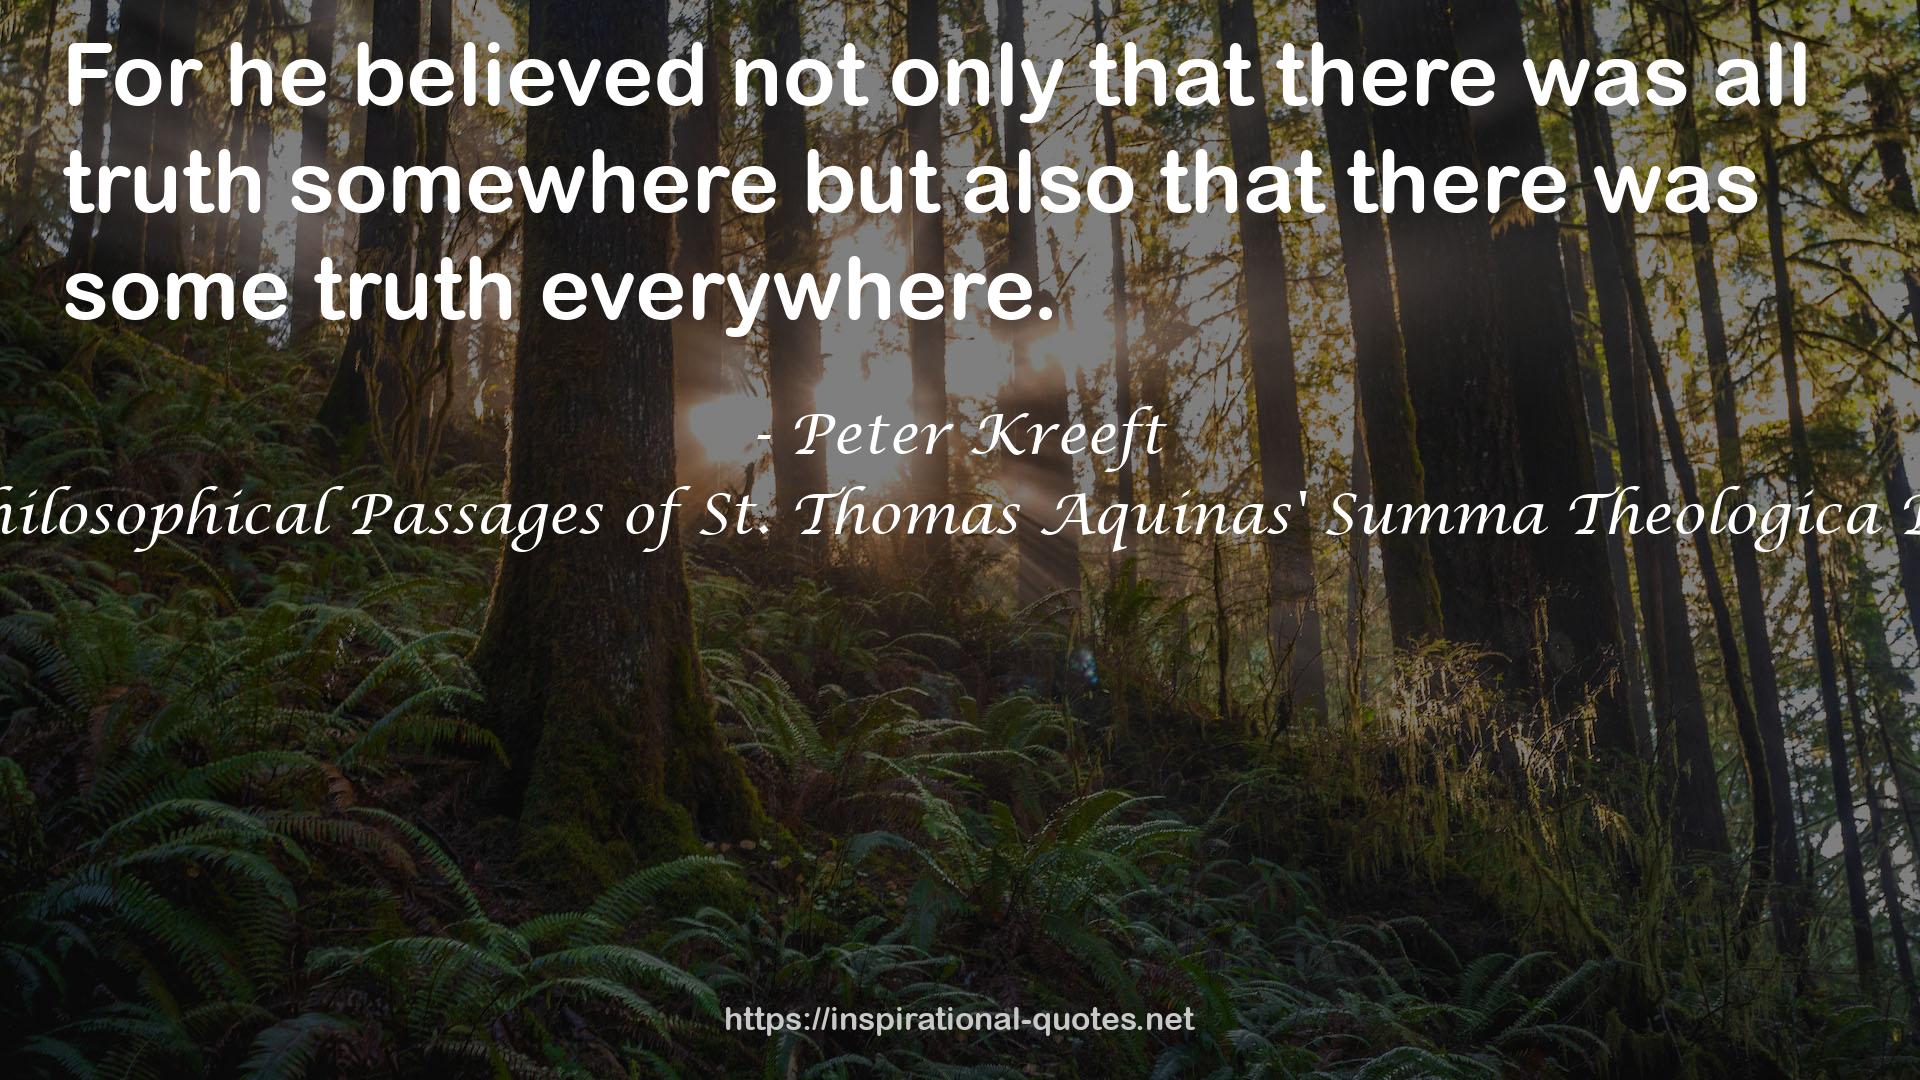 A Shorter Summa: The Essential Philosophical Passages of St. Thomas Aquinas' Summa Theologica Edited and Explained for Beginners QUOTES